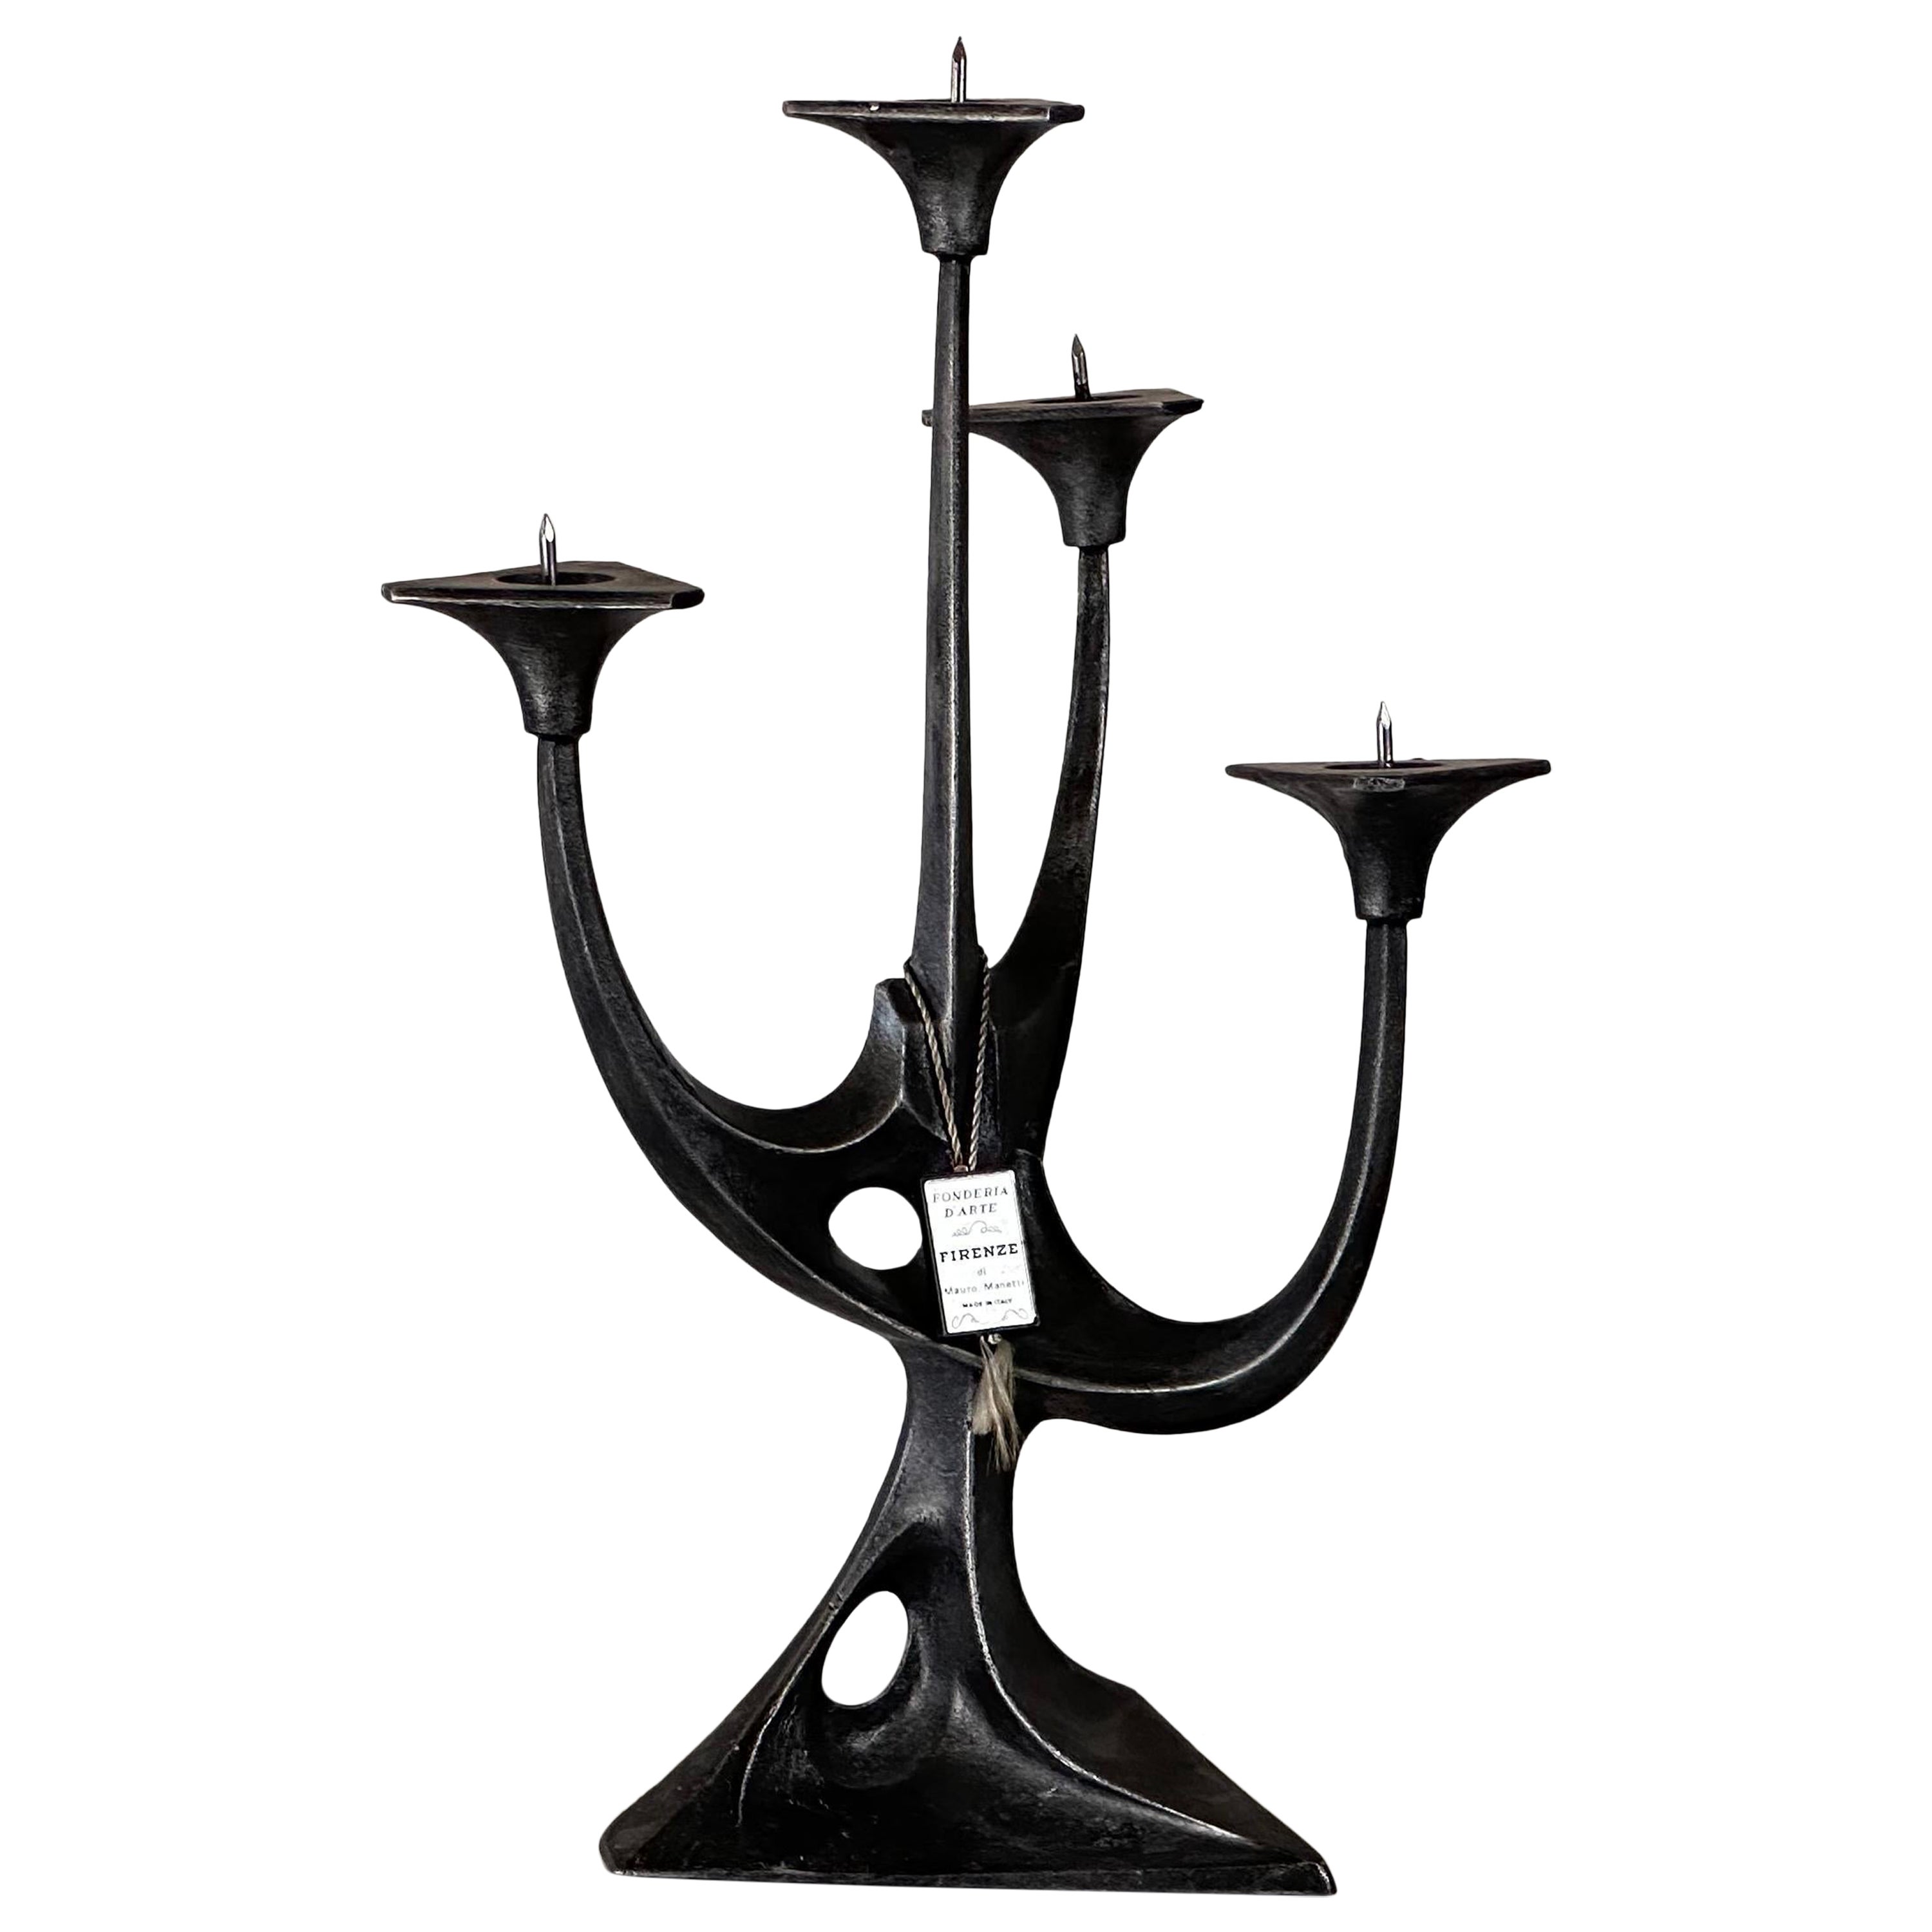 Sculptural Candelabra by Mauro Manetti for Fonderia d'Arte Firenze, 1960s For Sale